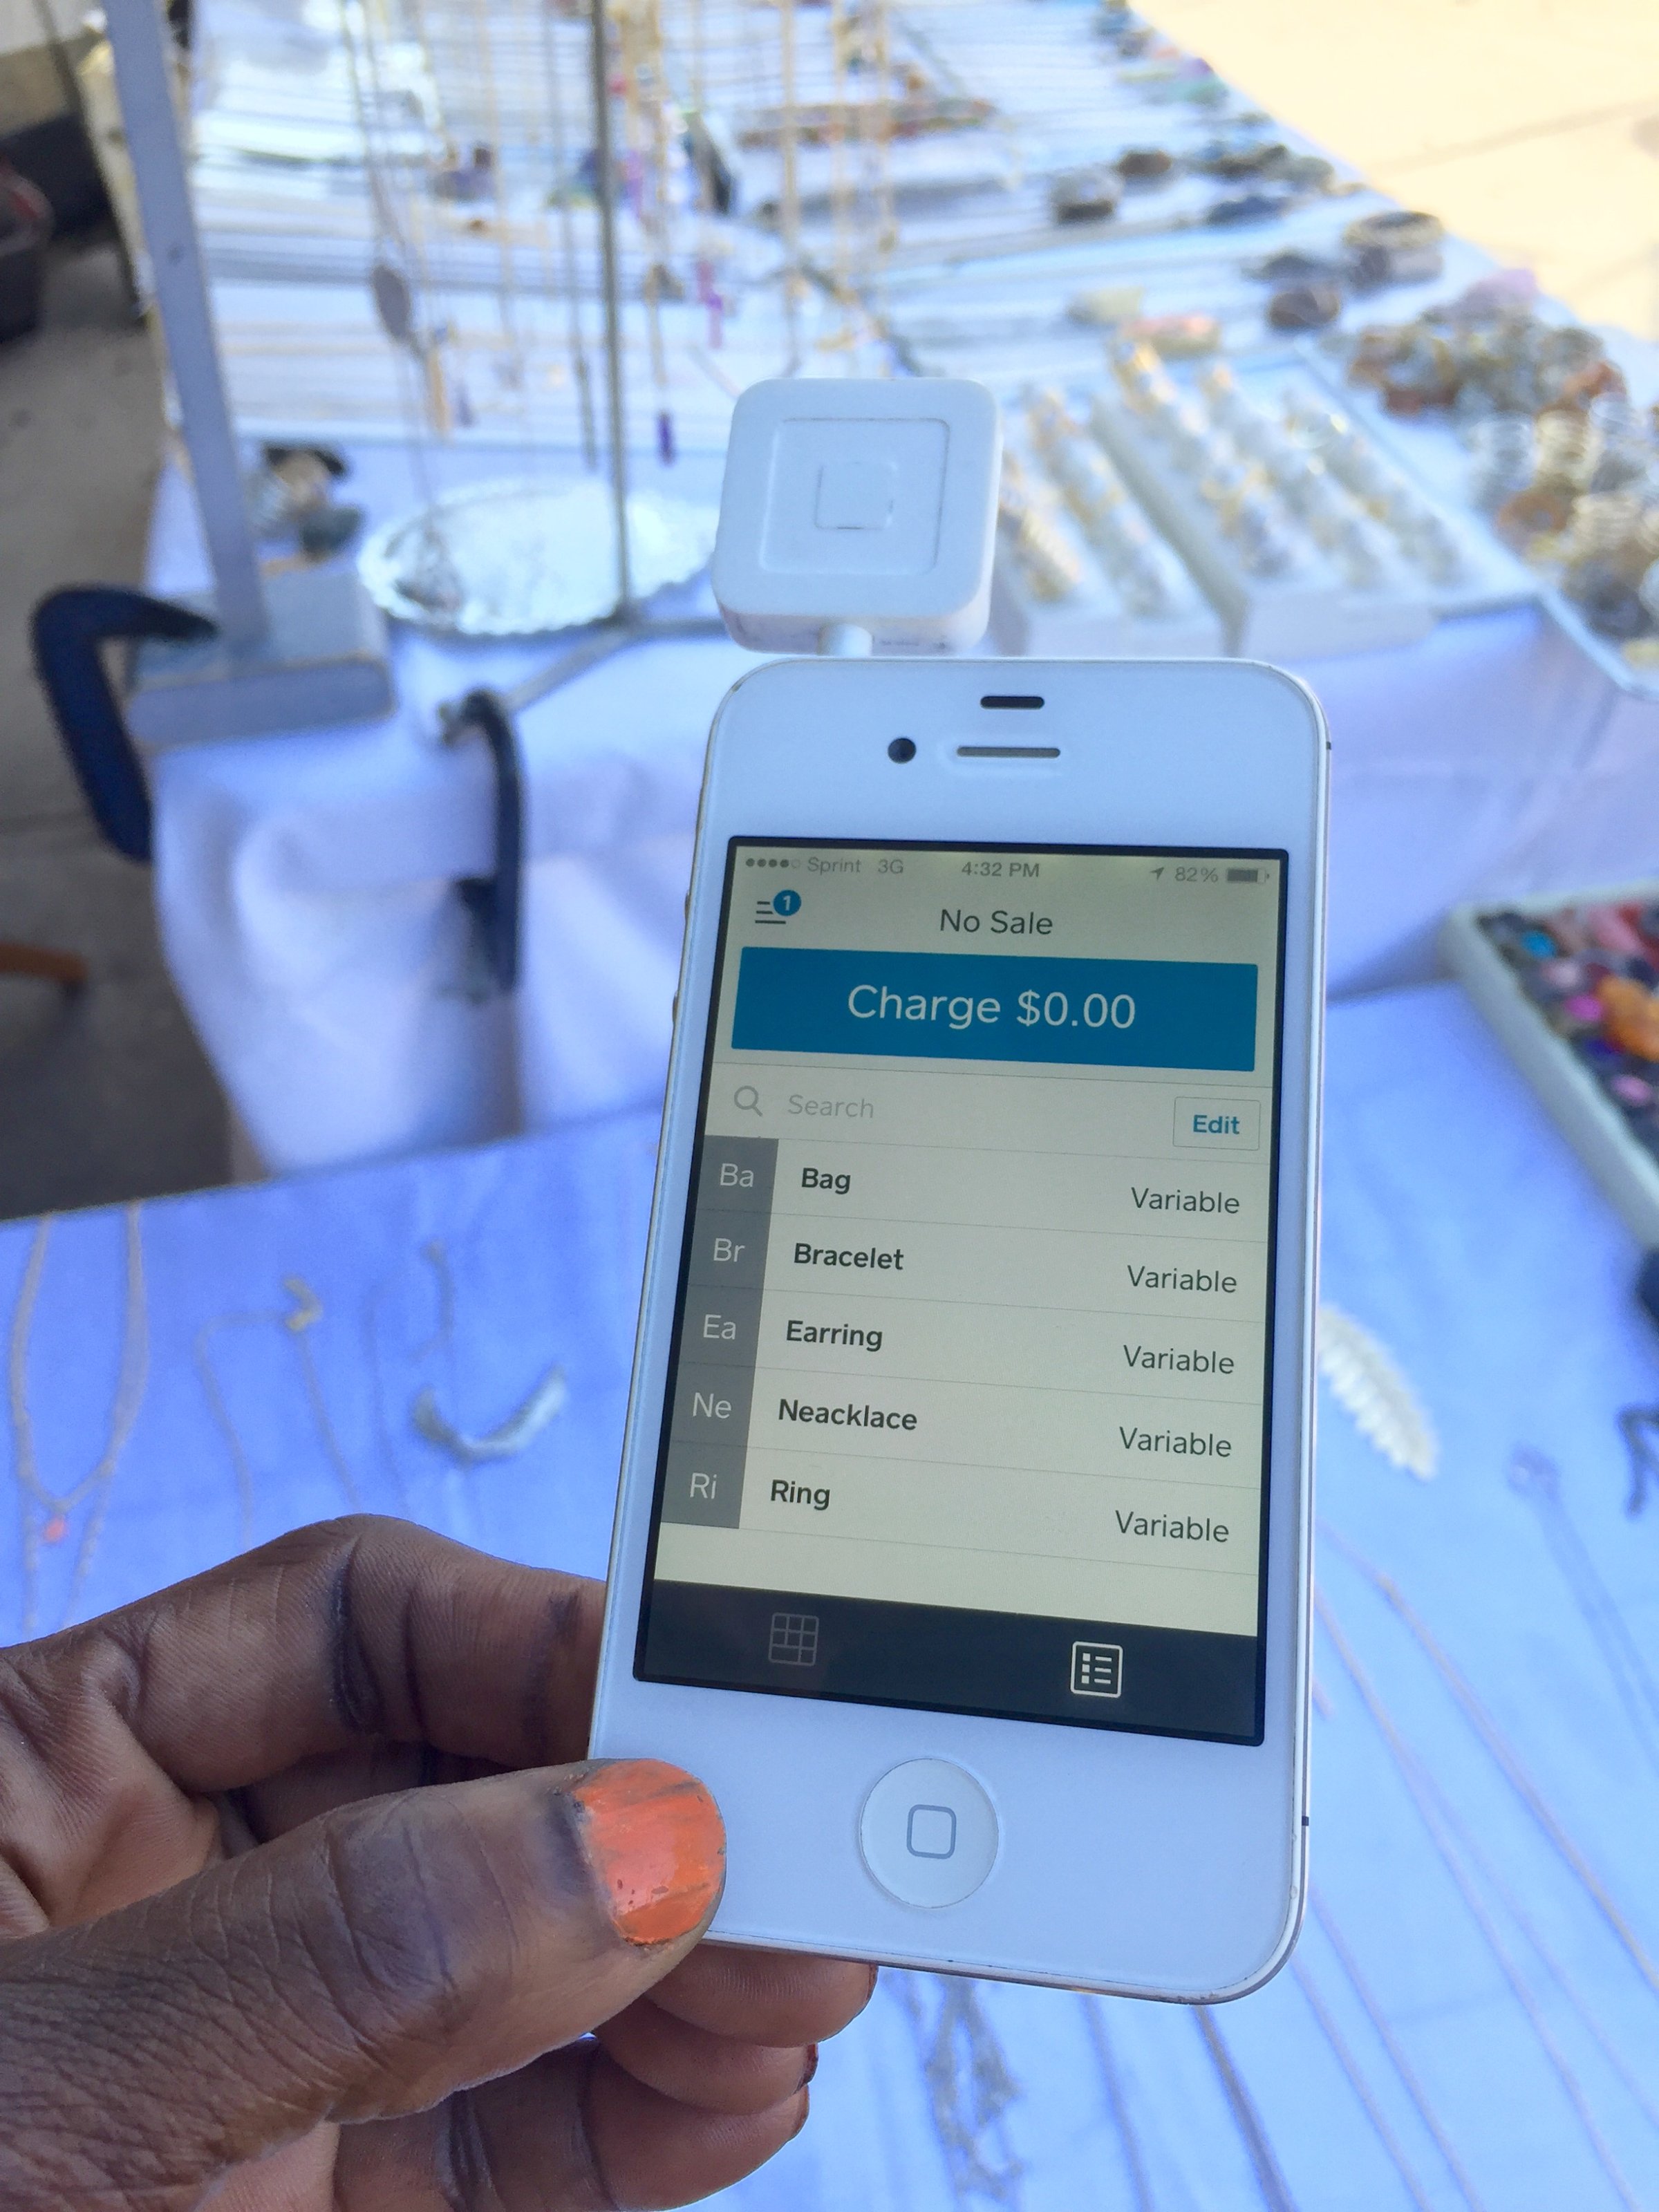 Technology Helps: A jewelry vendor at an outdoors craft market holds her credit card reader attached to a smart device for mobile point of sales activity